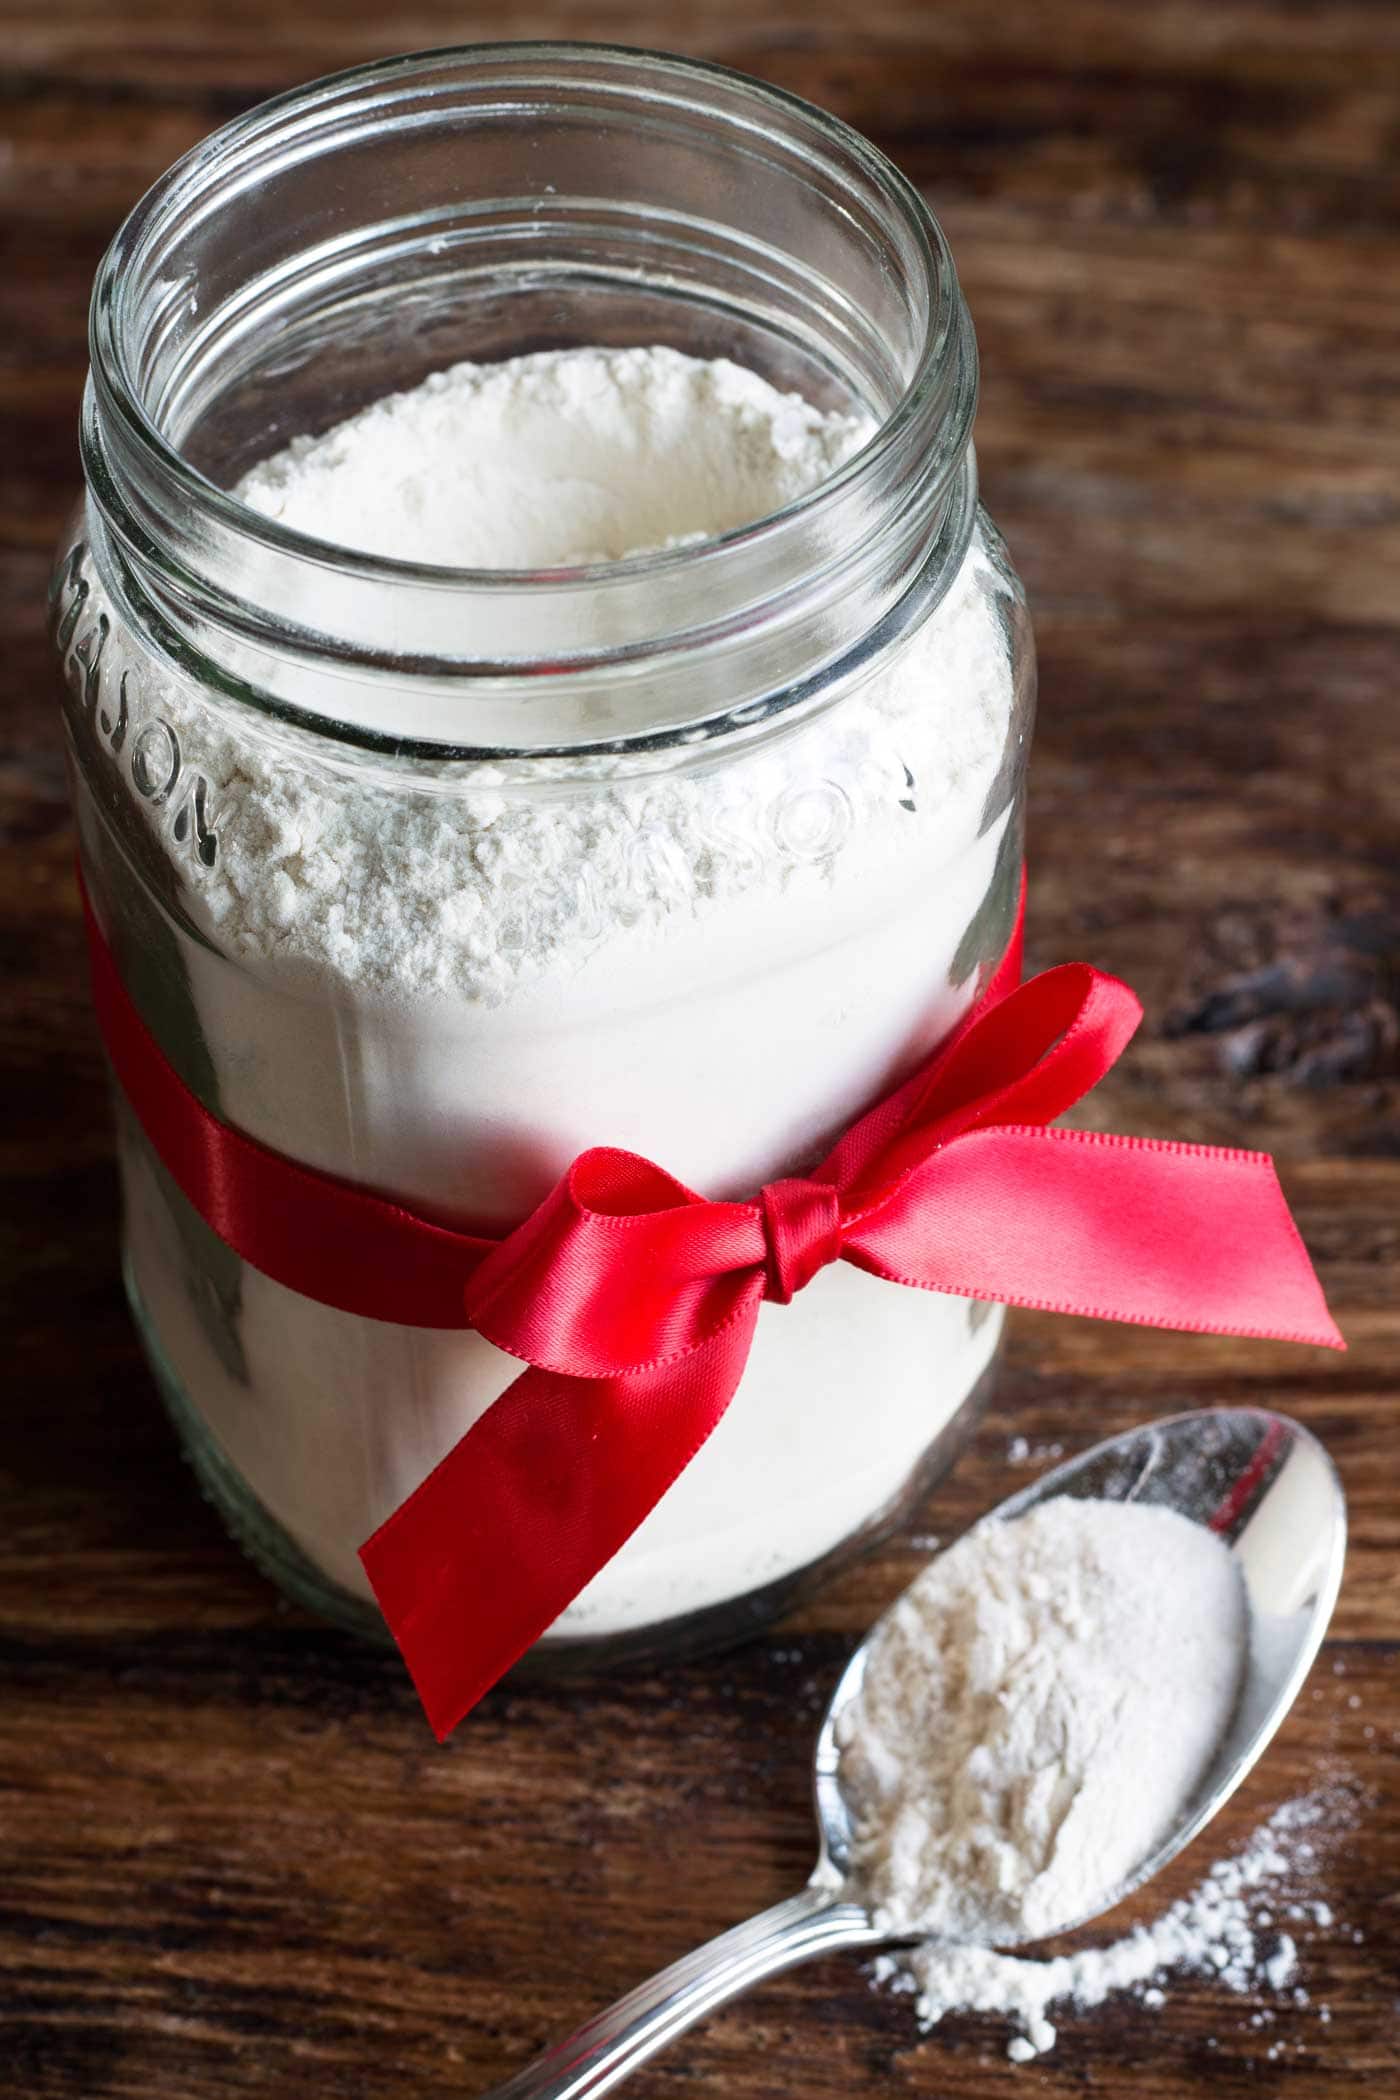 Perfect for holiday baking! Just like regular powdered sugar but made paleo. No refined cane sugar. Quick and easy to make in only 4 mins using a blender!